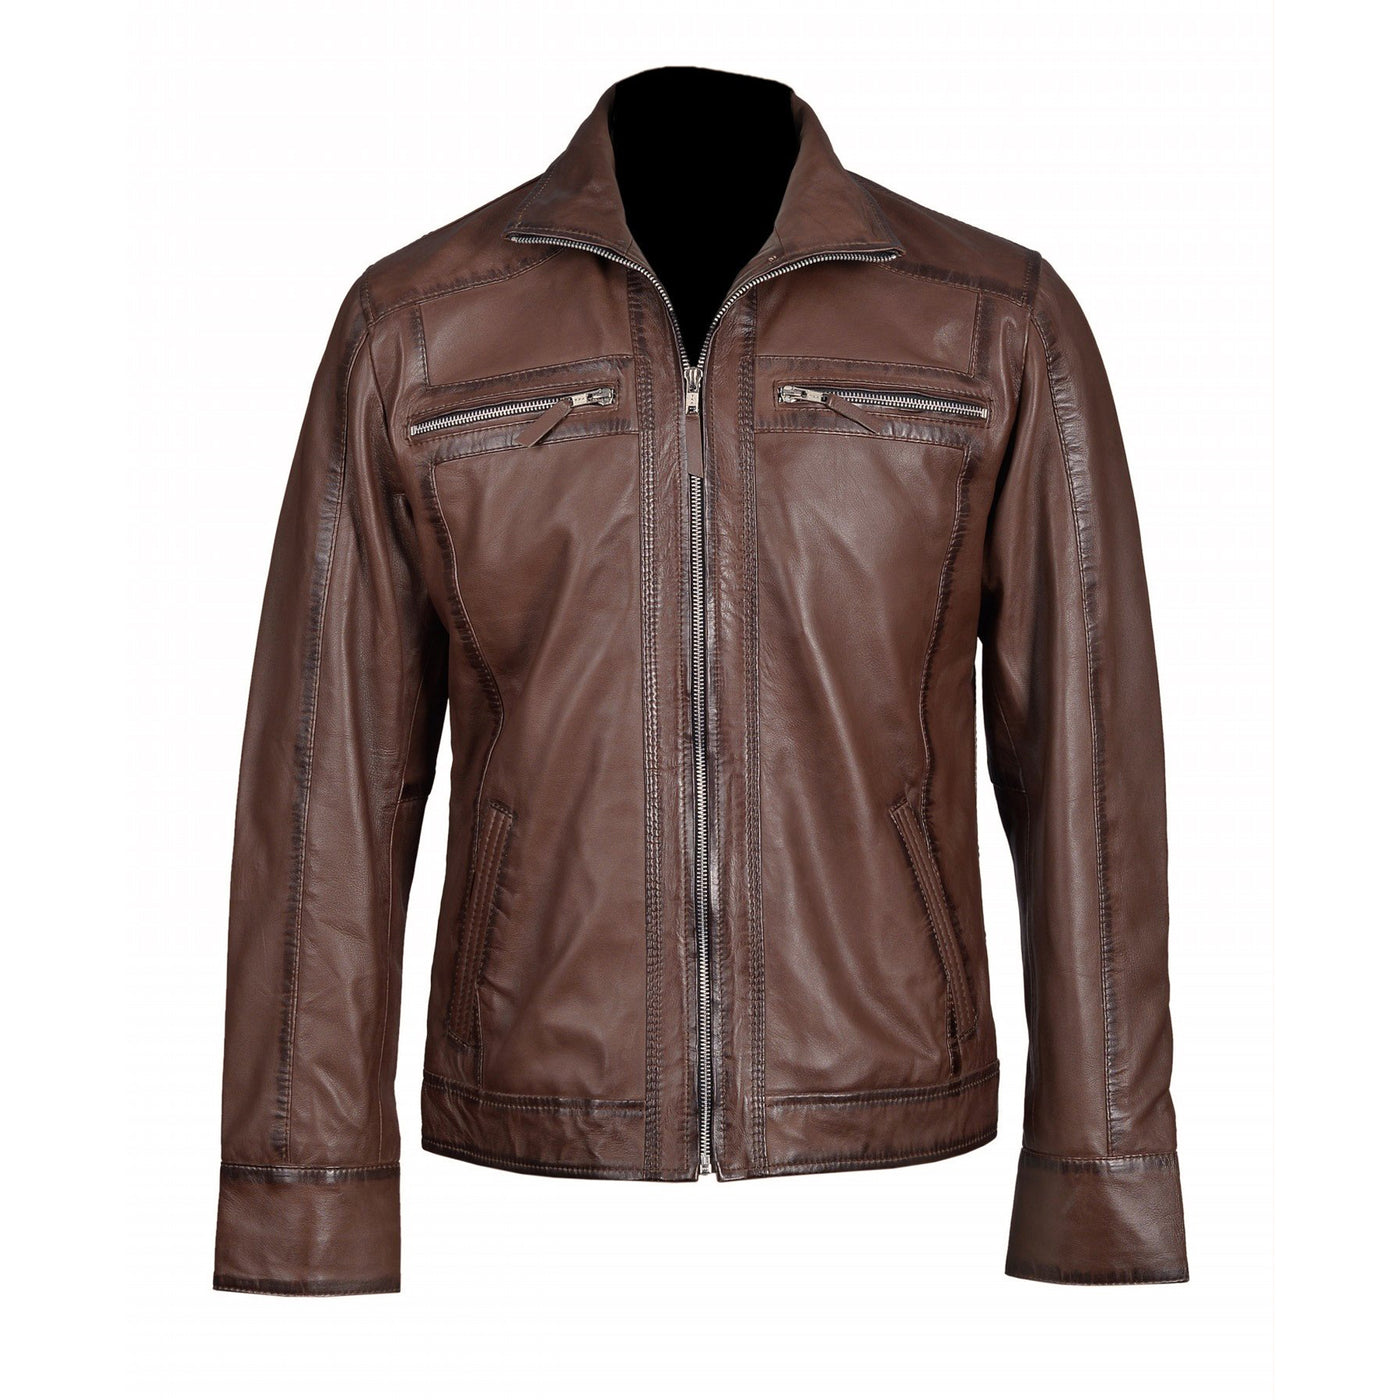 lightweight Thatchers Leather jacket hand waxed